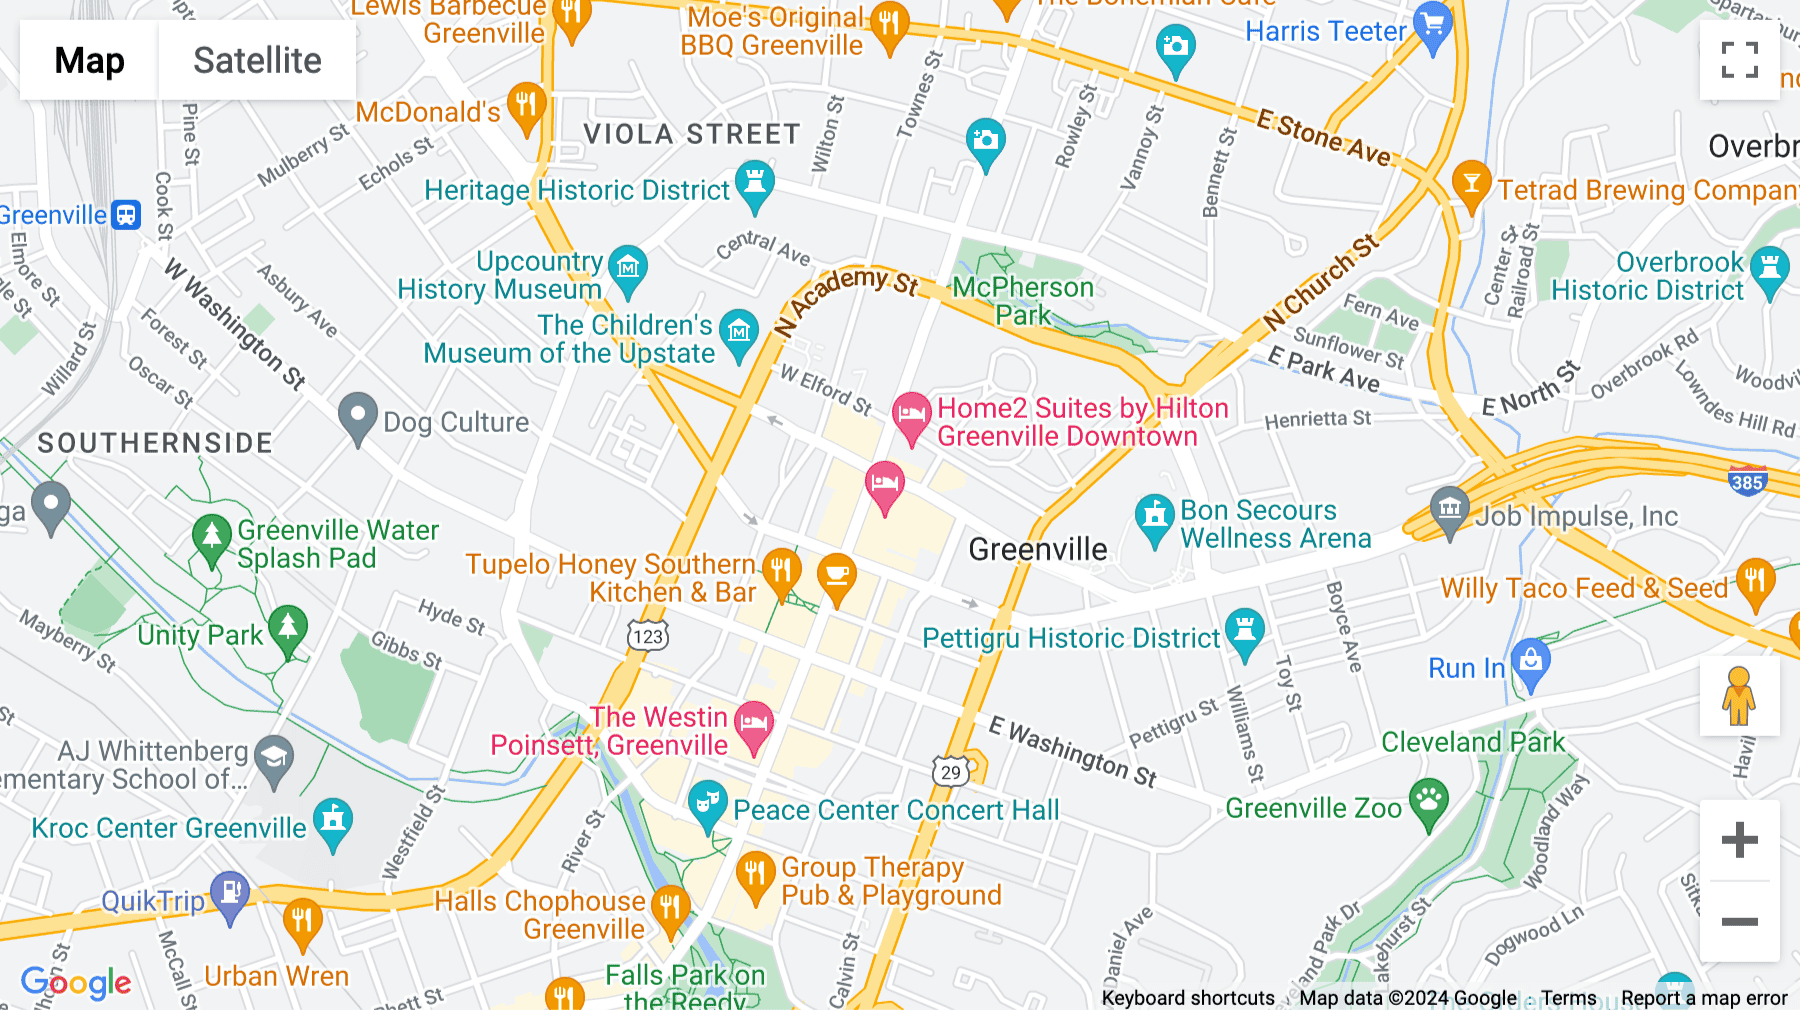 Click for interative map of 220 North Main Street, Suite 500, Downtown NOMA Tower Business Centre, Greenville